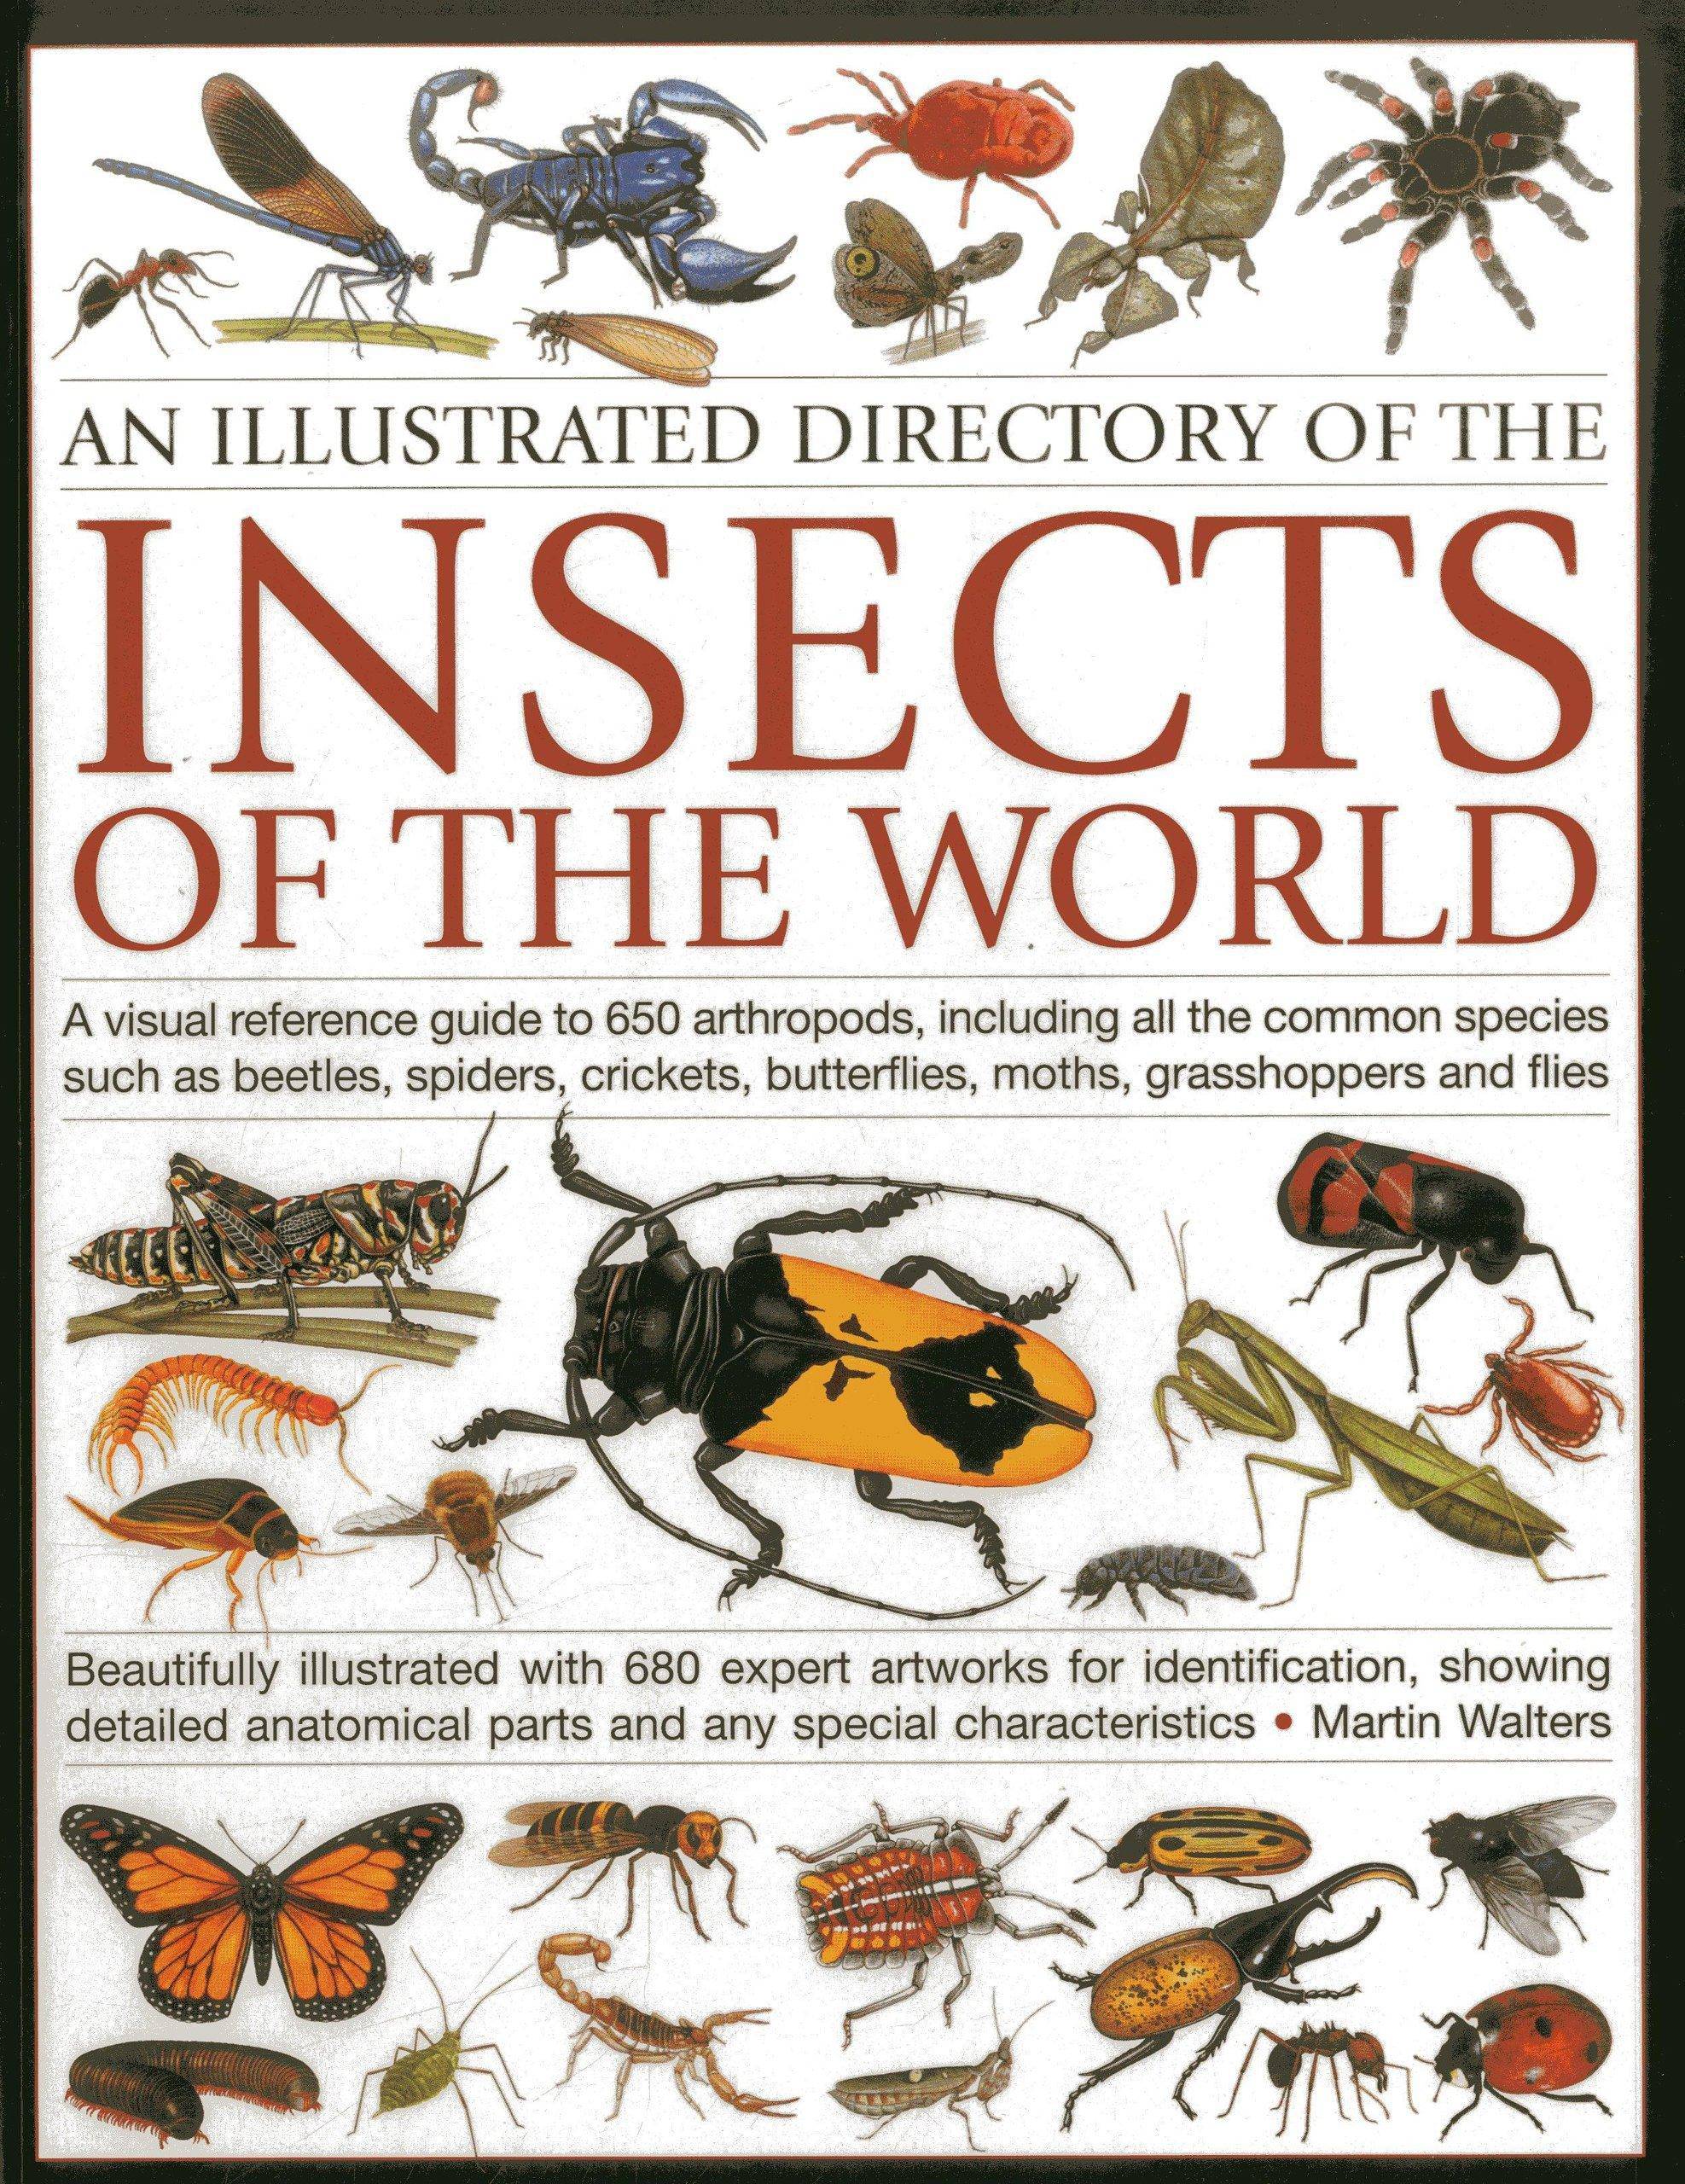 An Illustrated Directory of the Insects of the World - SureShot Books Publishing LLC